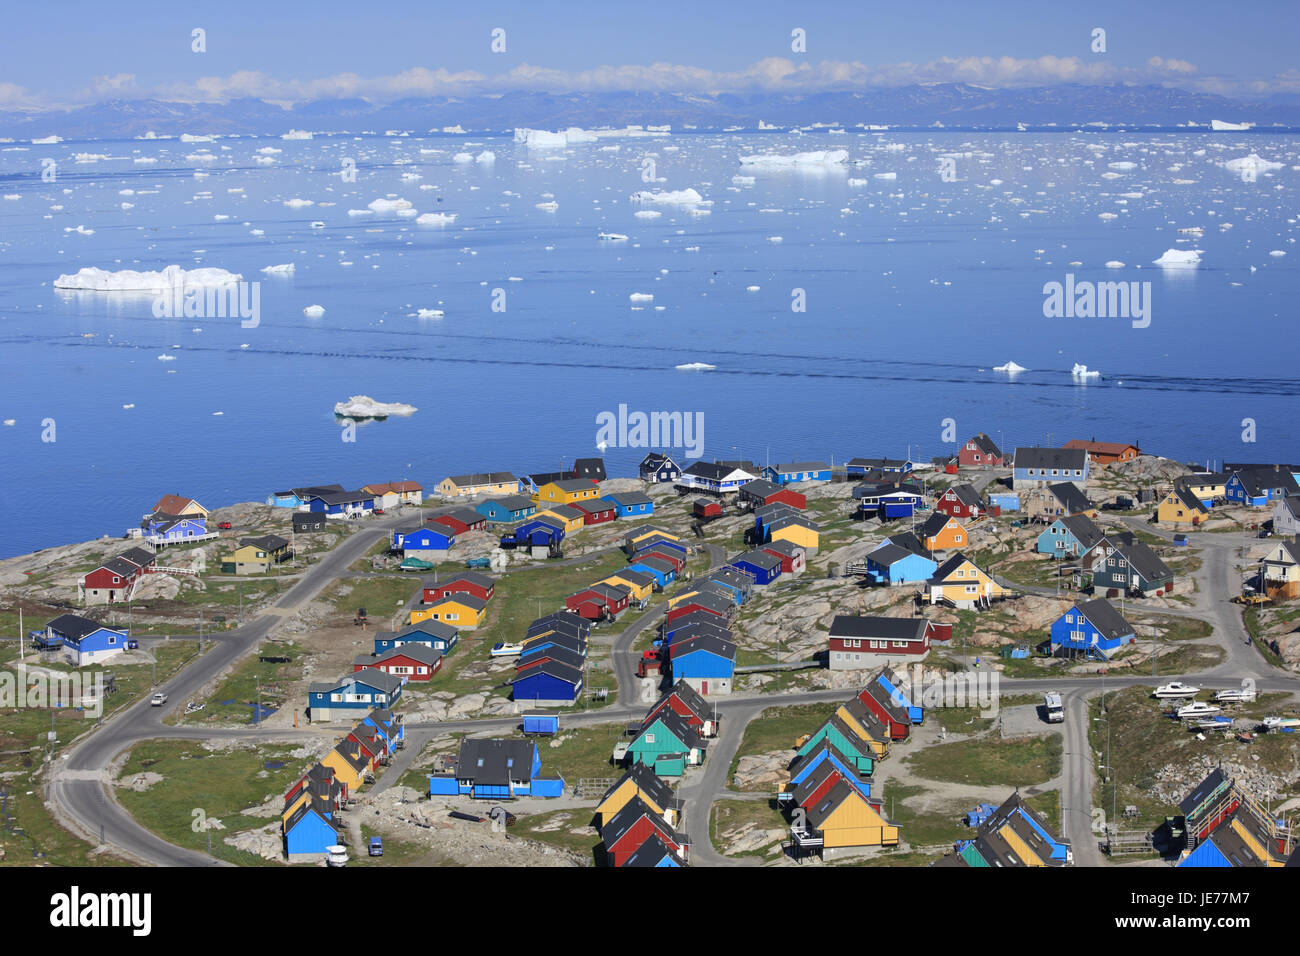 Greenland, Disco Bay, Ilulissat, town overview, timber houses, fjord, floes, view, Western Greenland, outside, water, sea, the Arctic, coast, town, residential houses, architecture, timber houses, brightly, deserted, E sharp, icebergs, drift ice, climate change, Stock Photo